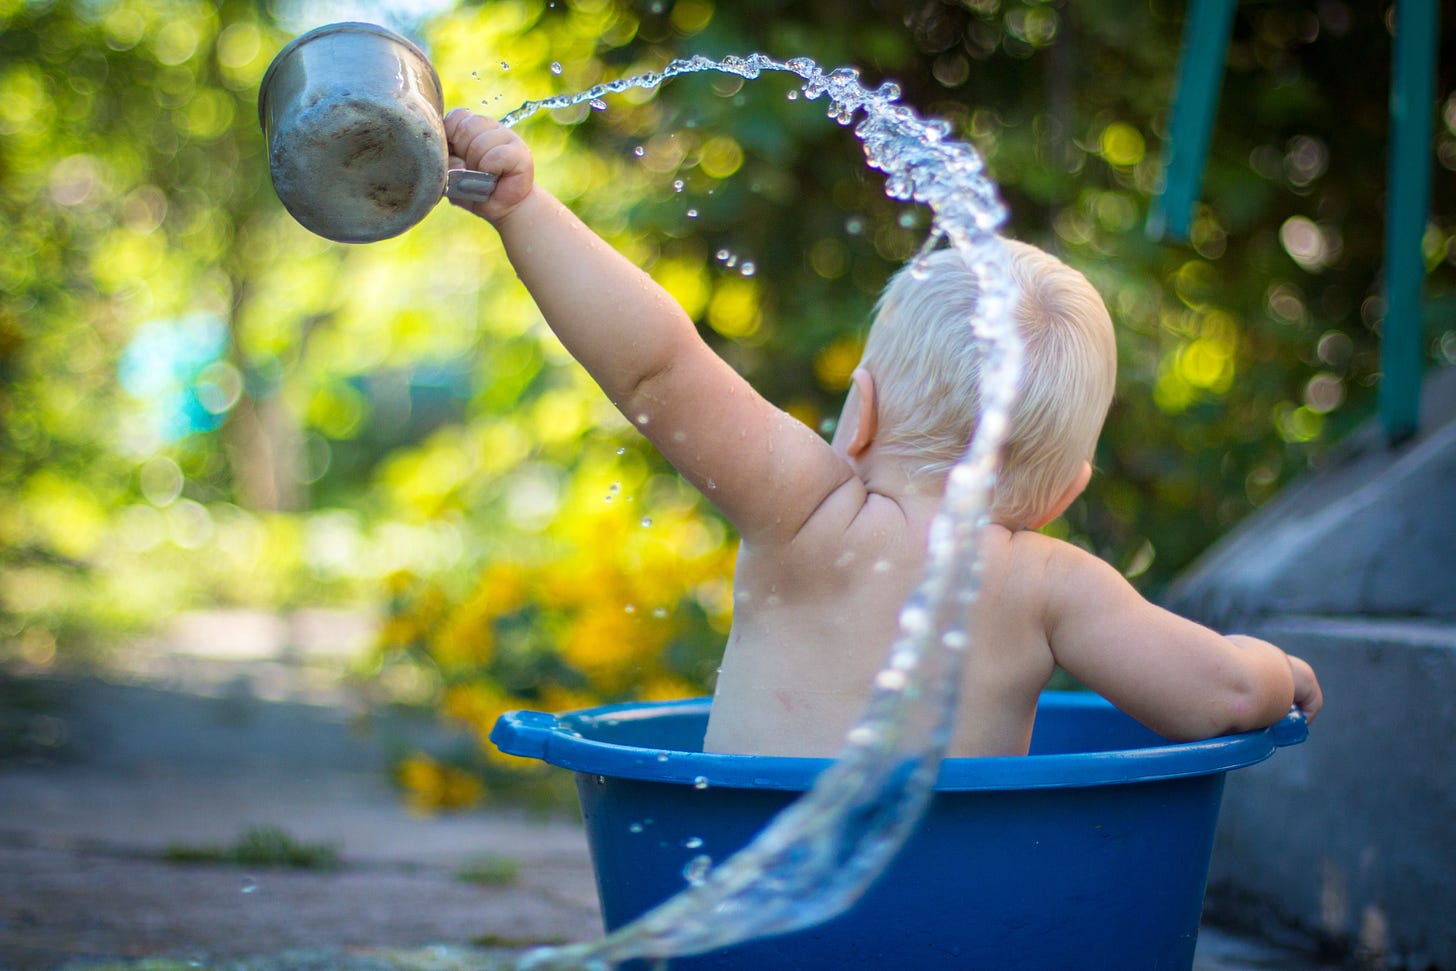 A toddler sat in a bowl of water splashes himself with water from a tin cup. Photo by Lubomirkin on Unsplash